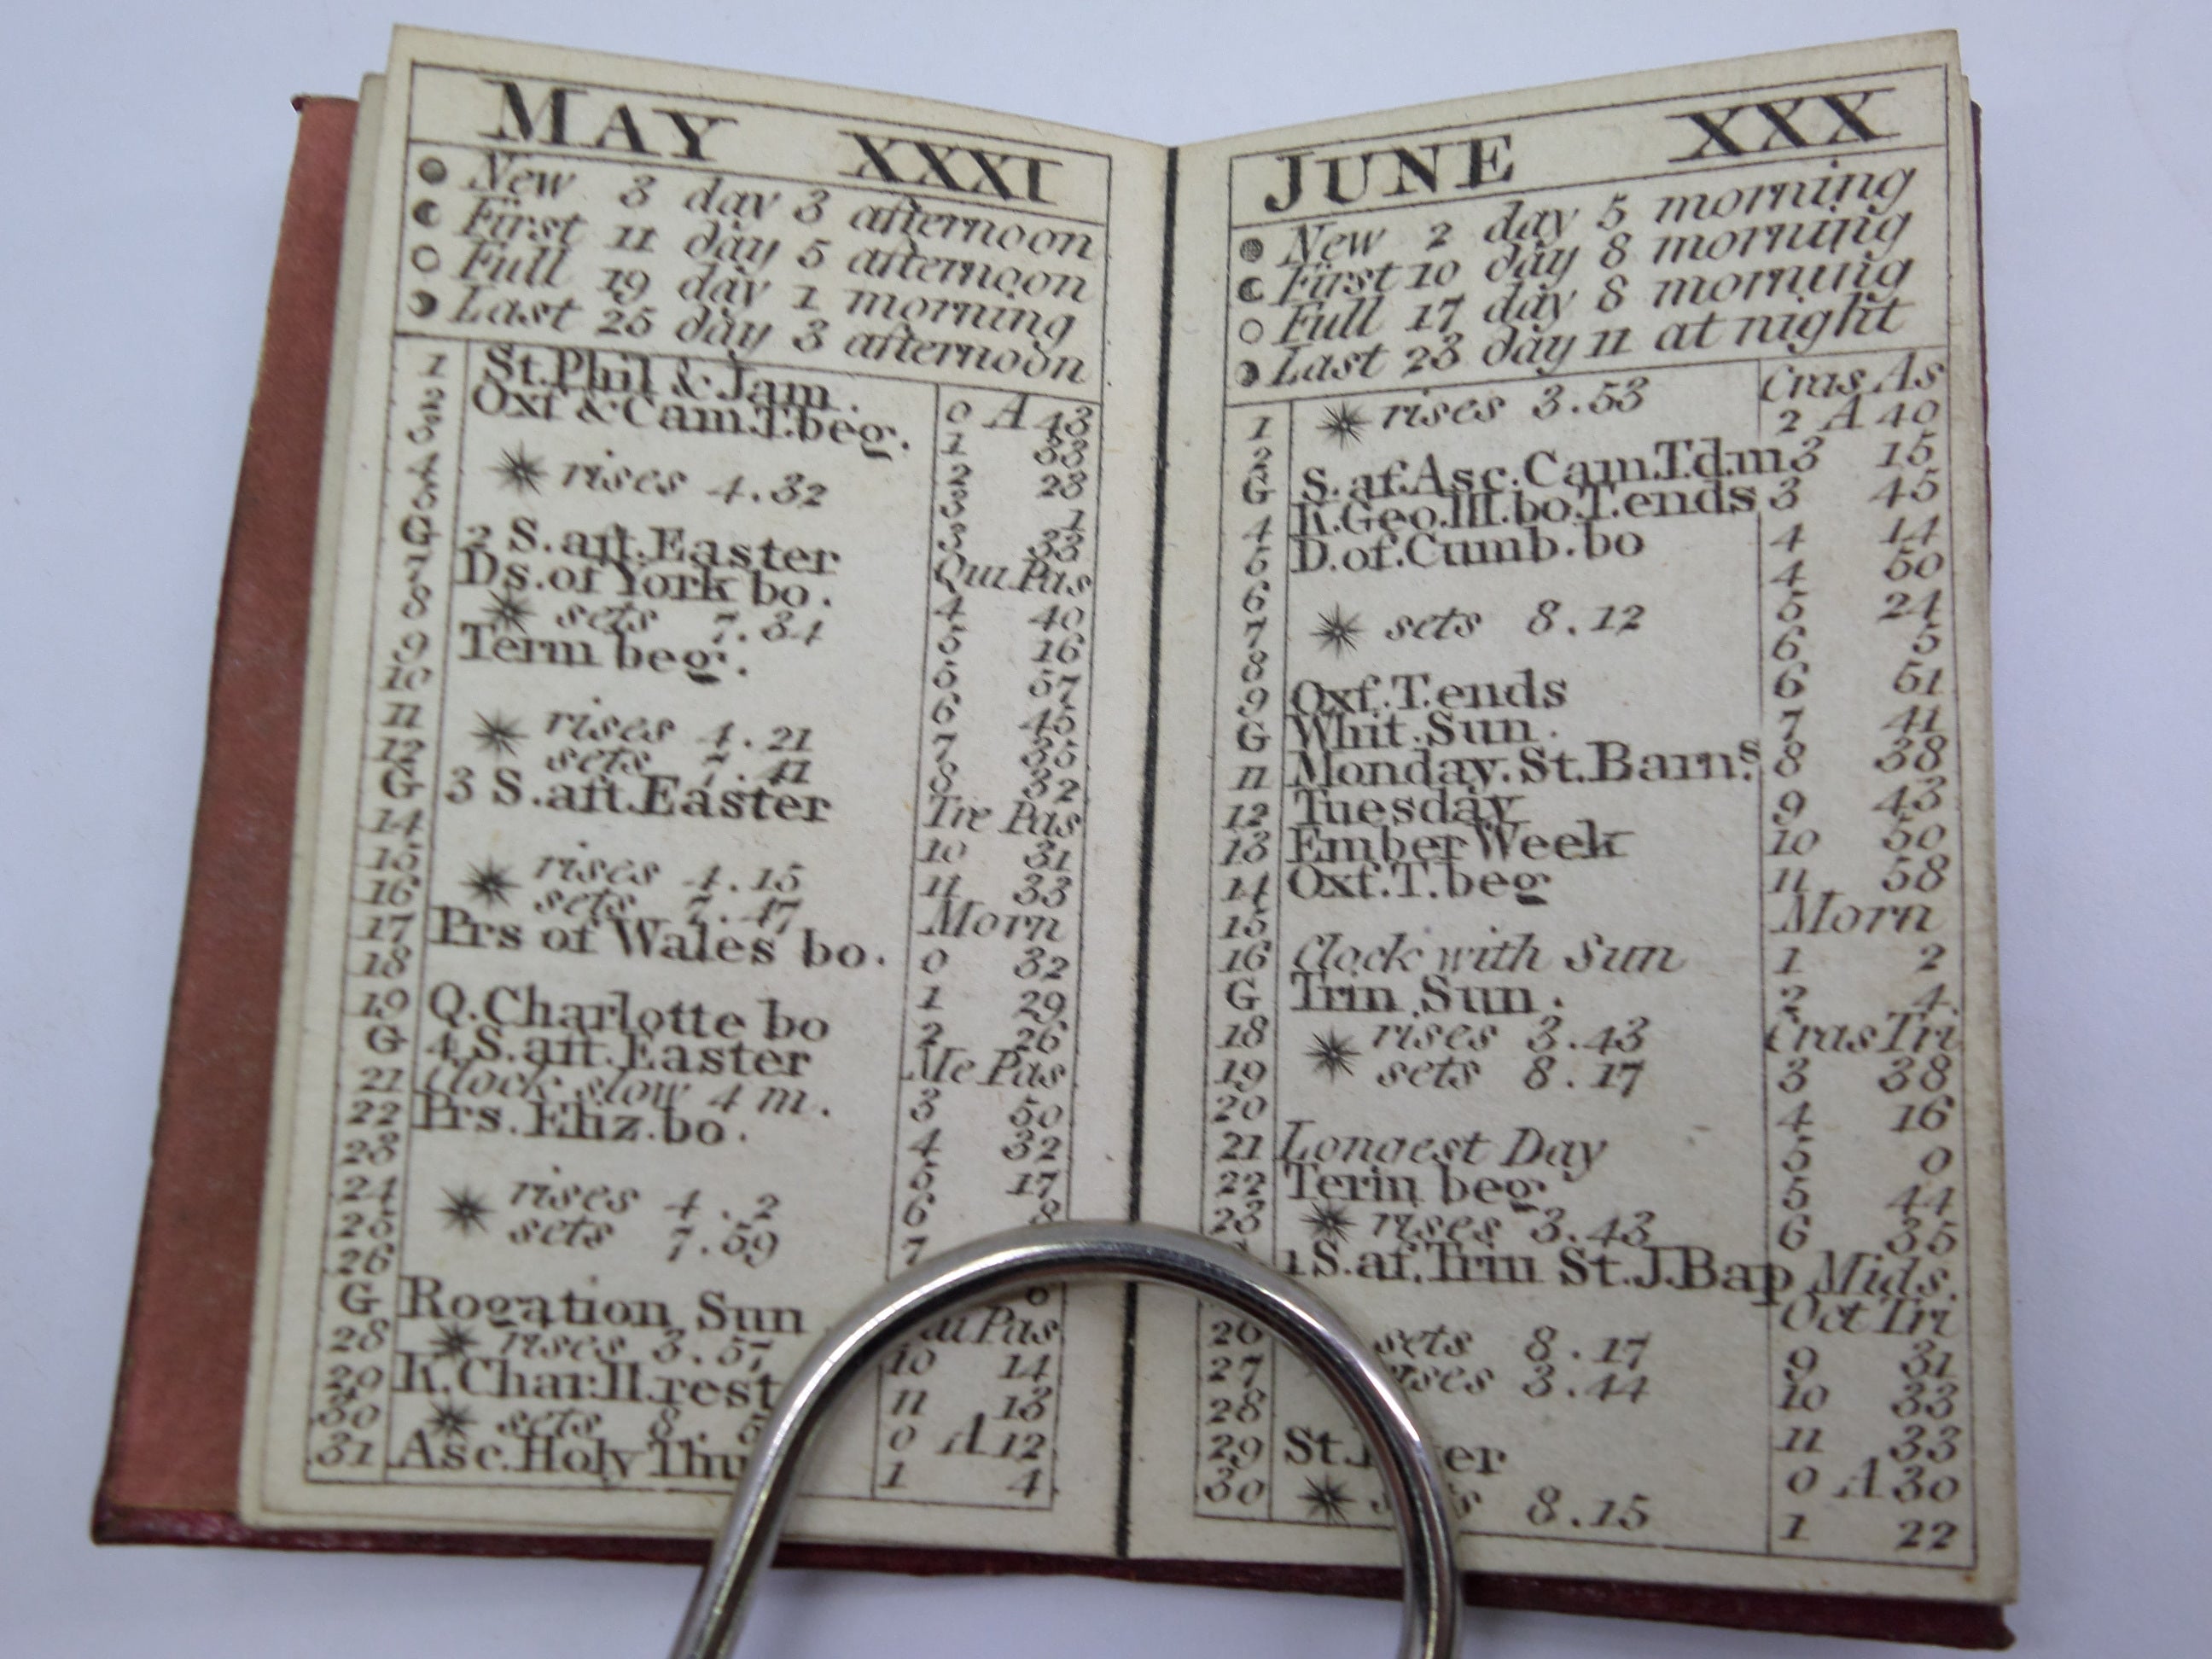 THE LONDON ALMANACK FOR THE YEAR 1810 FINE MINIATURE LEATHER-BOUND